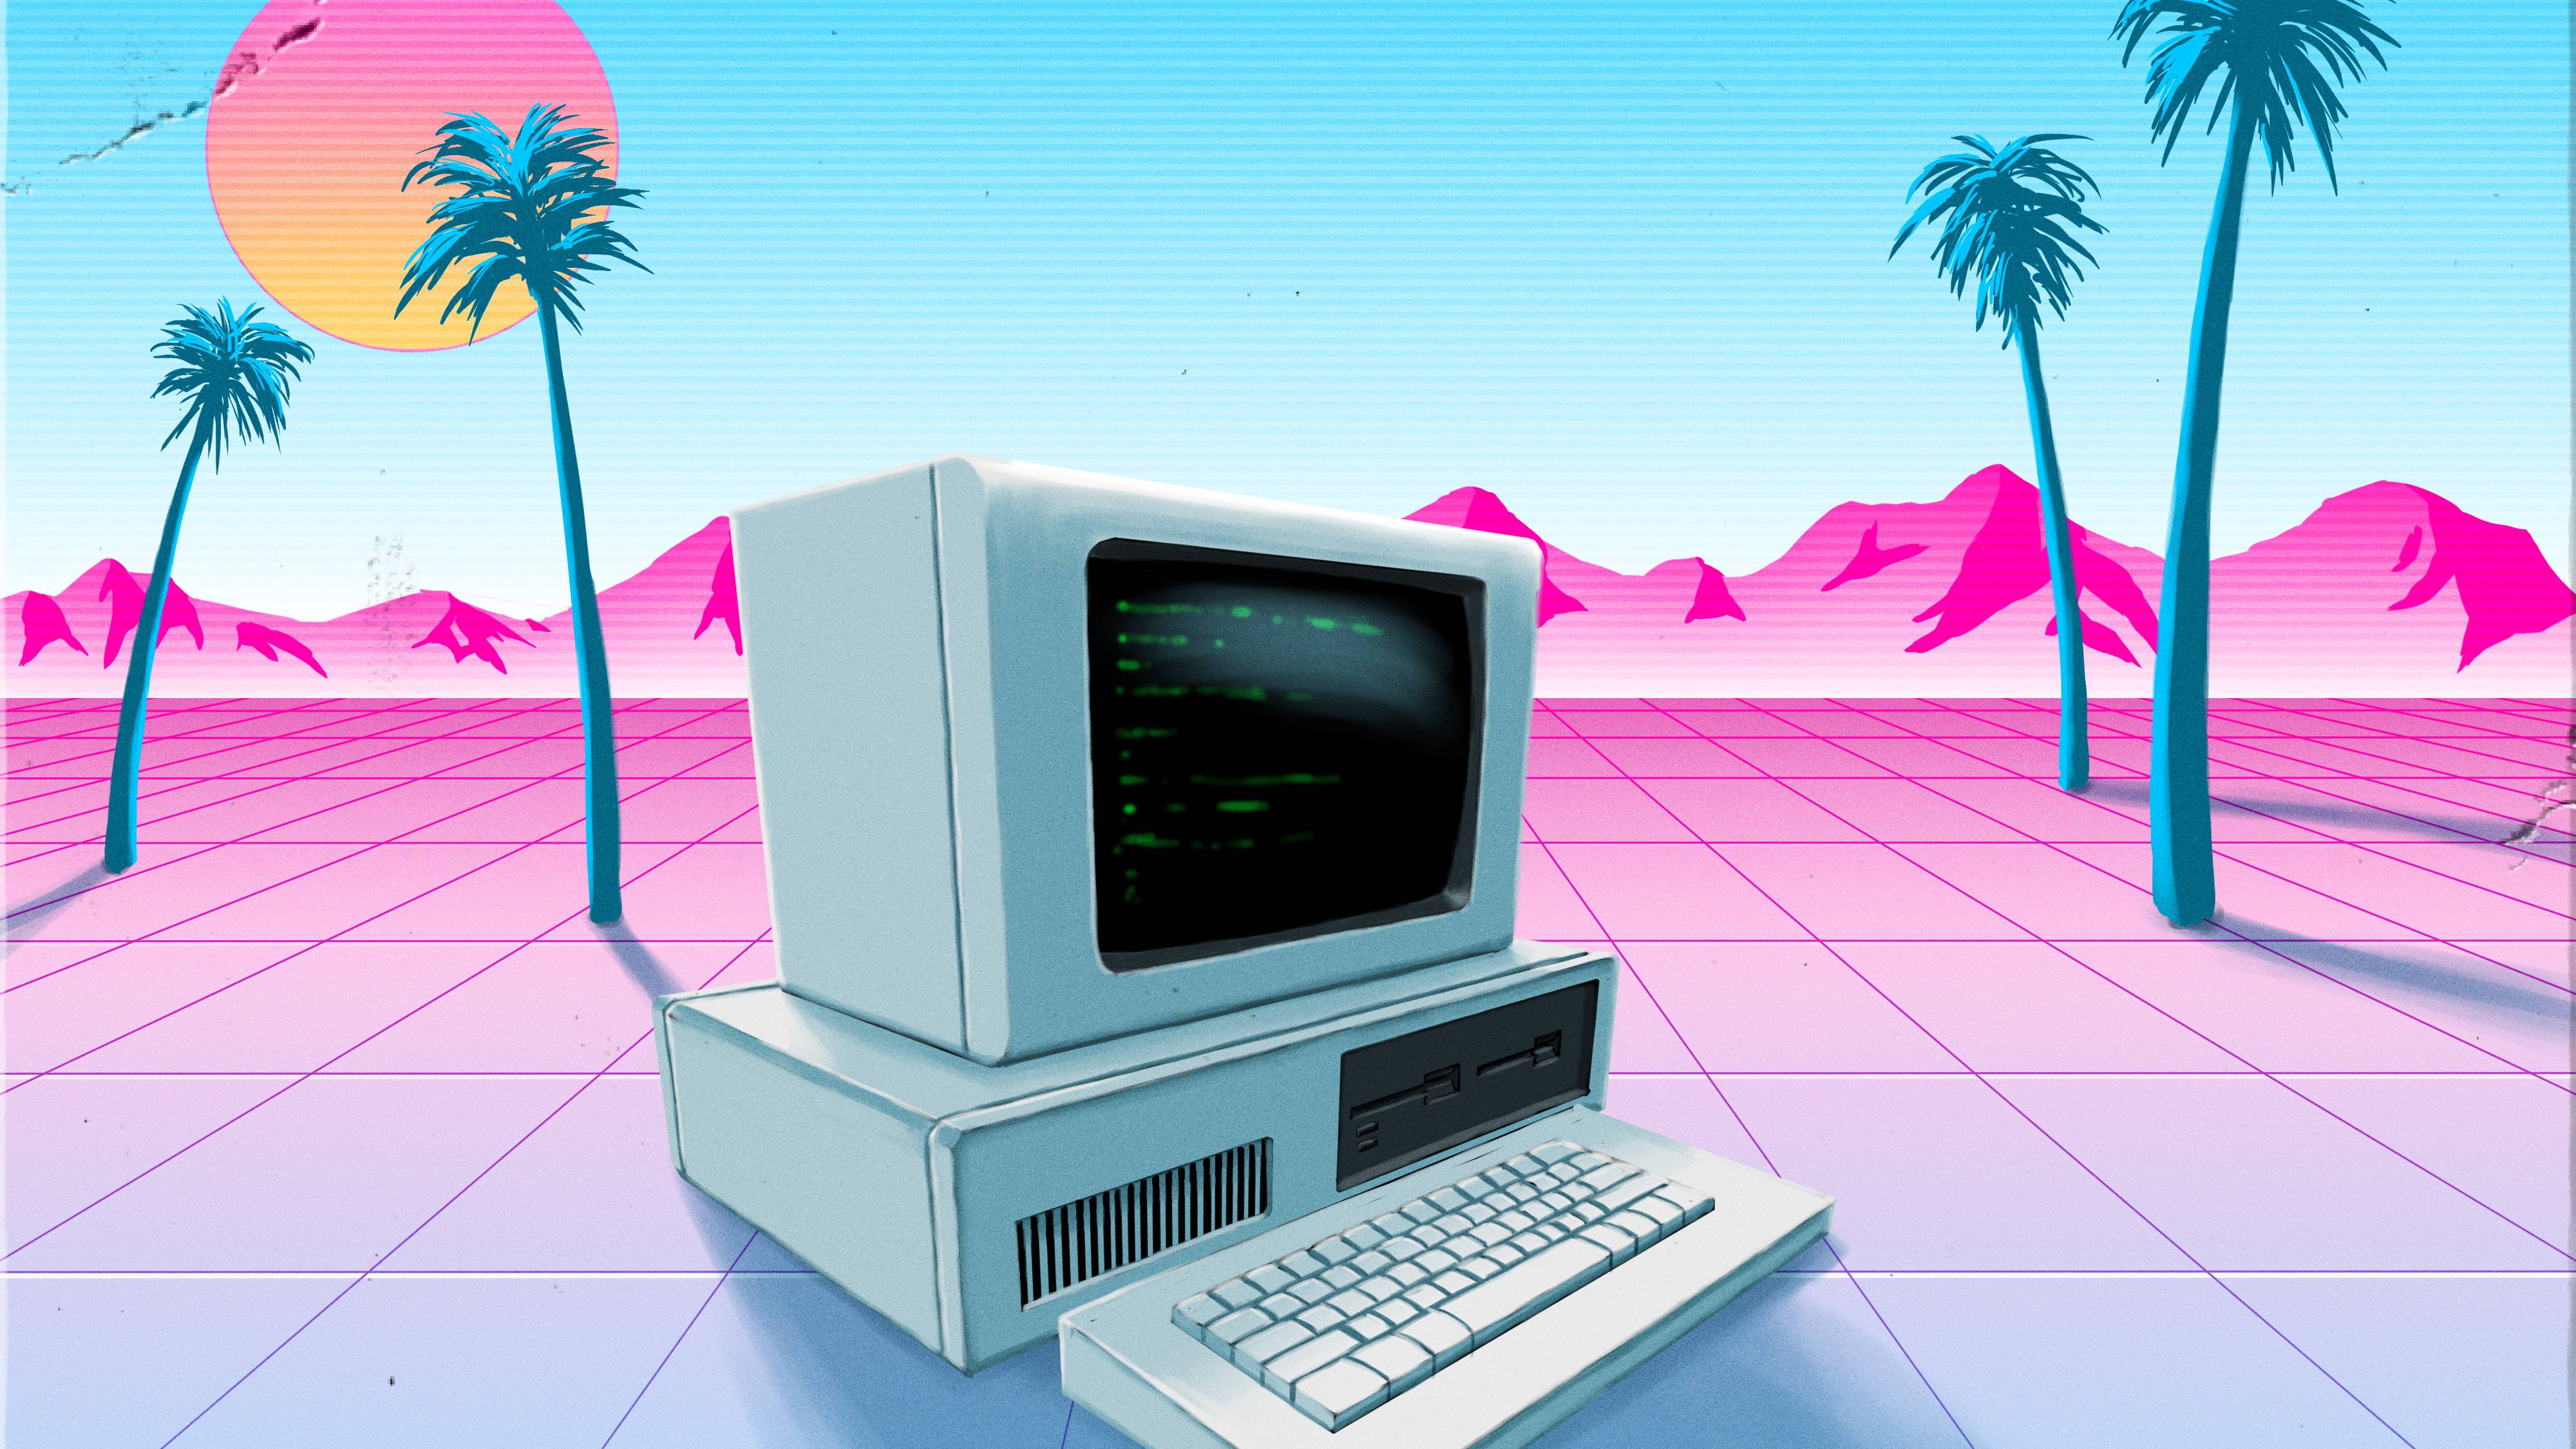 A computer on a beach with palm trees - Computer, synthwave, palm tree, technology, HD